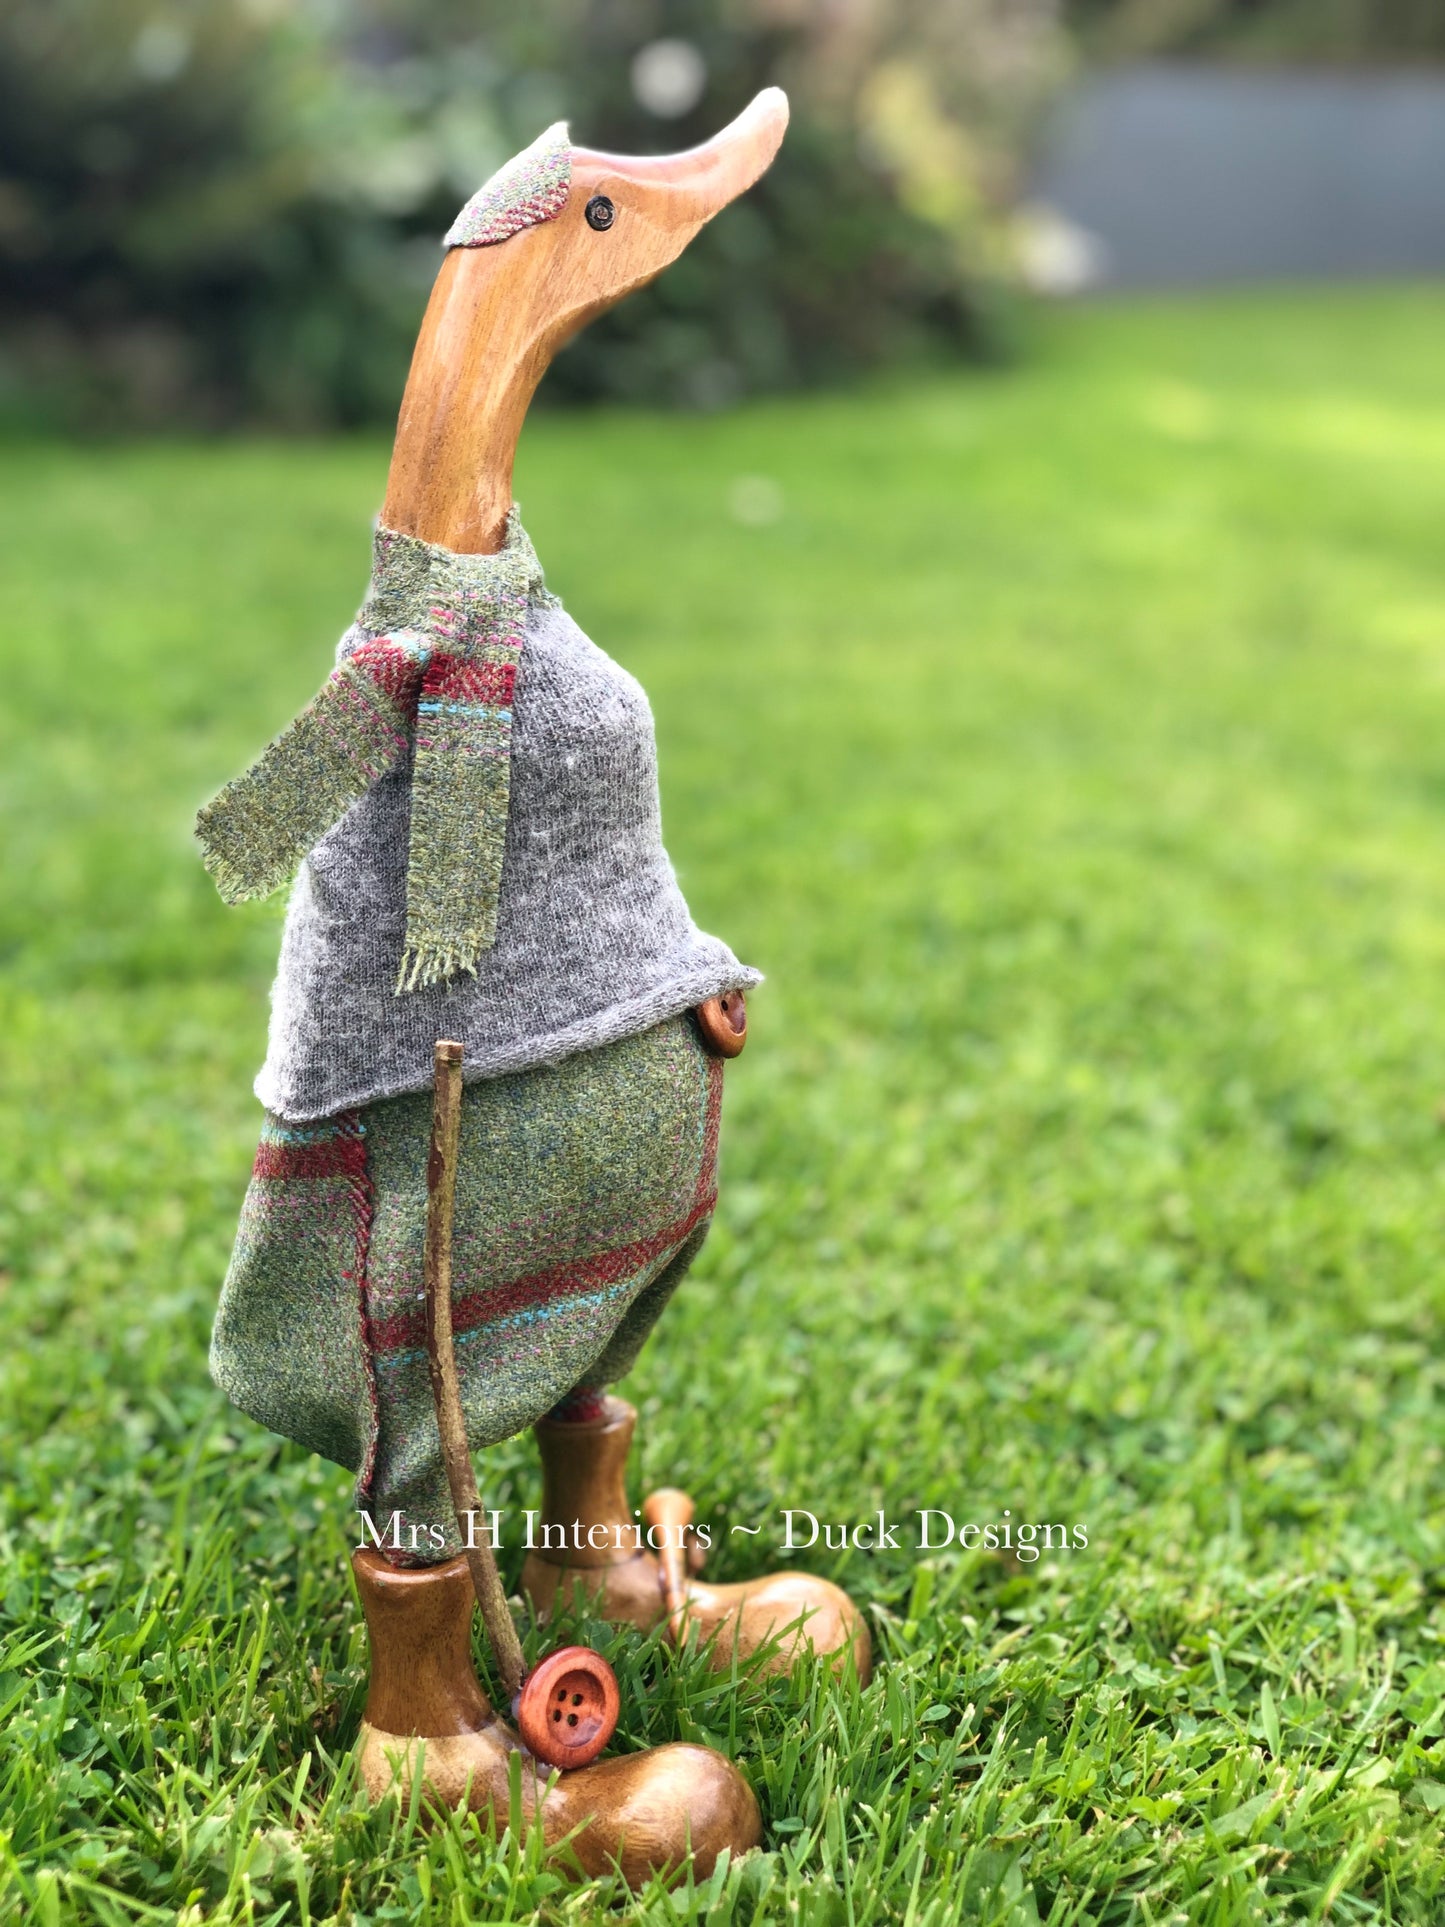 Golfer - Decorated Wooden Duck in Boots by Mrs H the Duck Lady